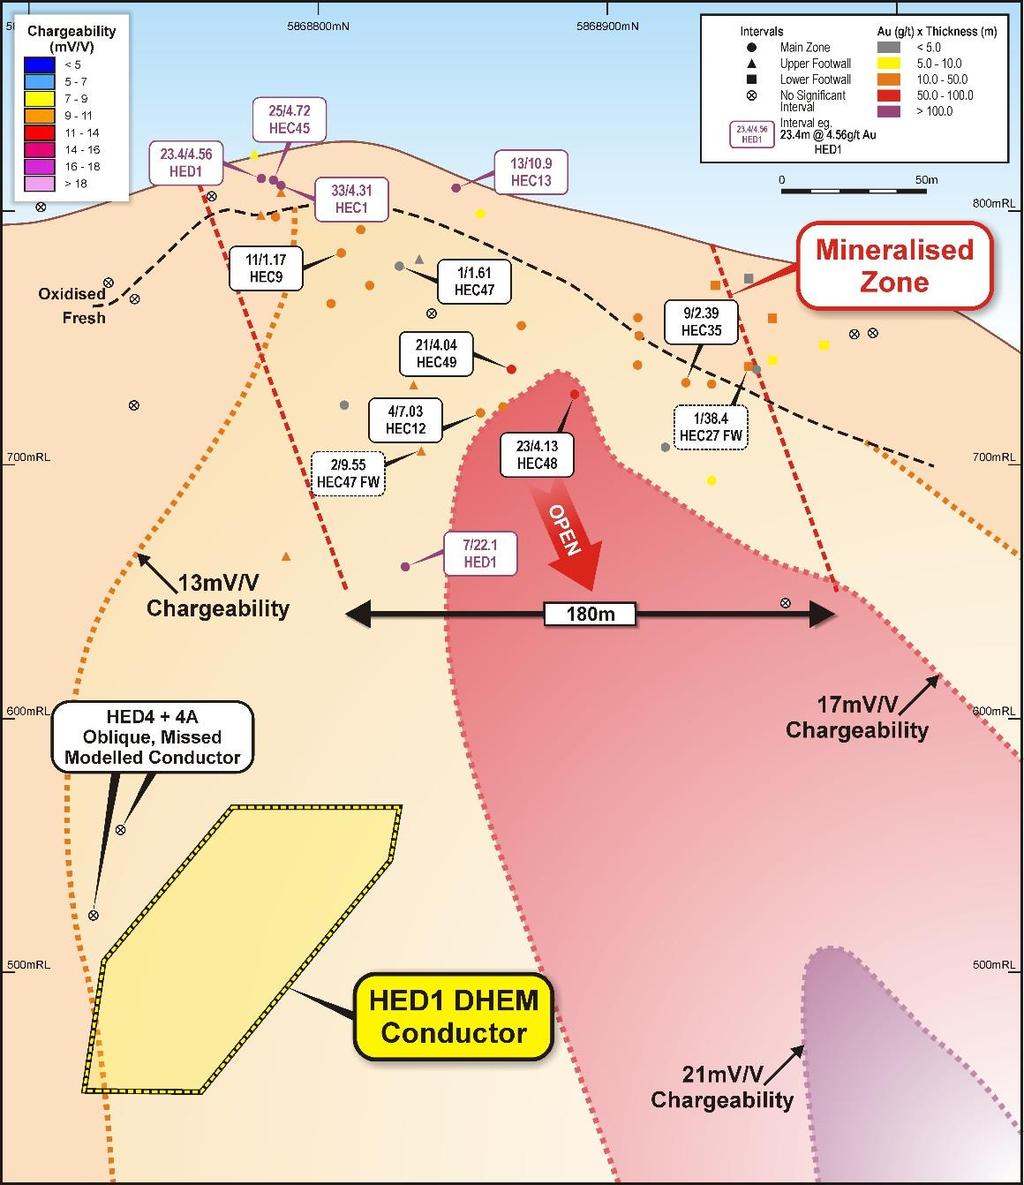 Hill 800 is a volcanic-hosted massive sulphide (VHMS) gold-copper system with many similarities in host rock, age and mineralisation style to the 1.5Moz Henty gold deposit in western Tasmania.